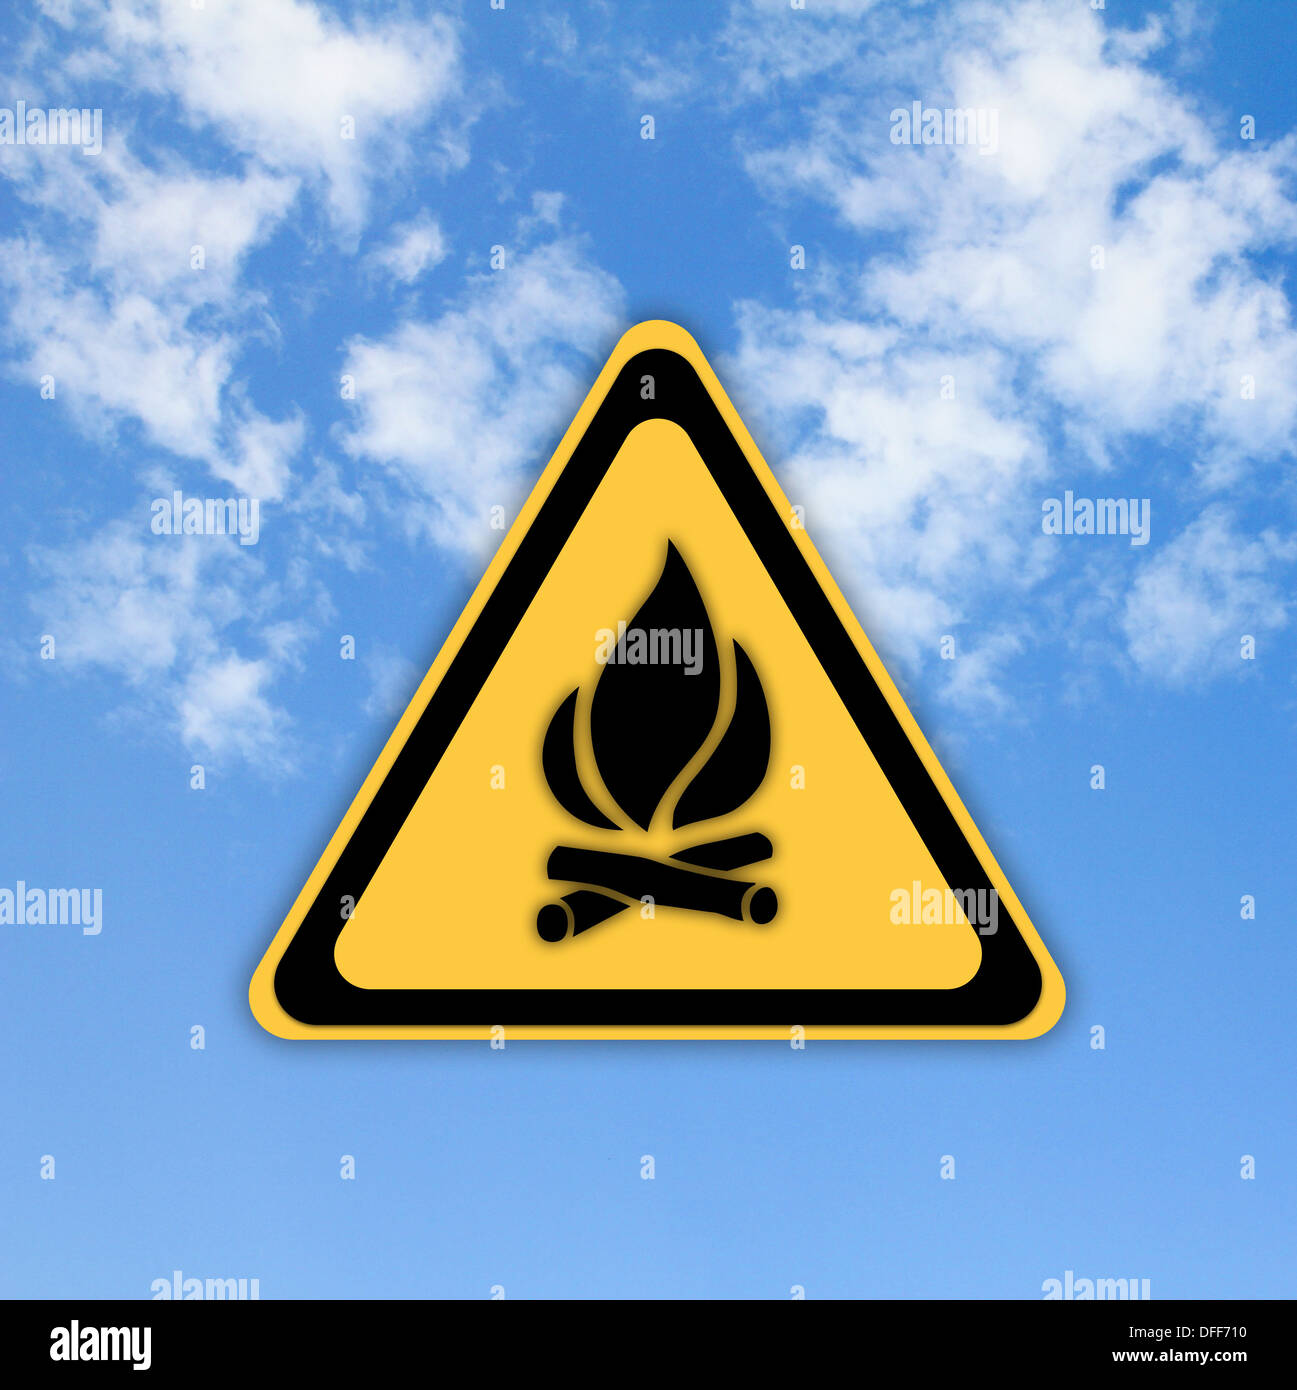 Glossy Fire danger sign on beautiful sky background. Stock Photo